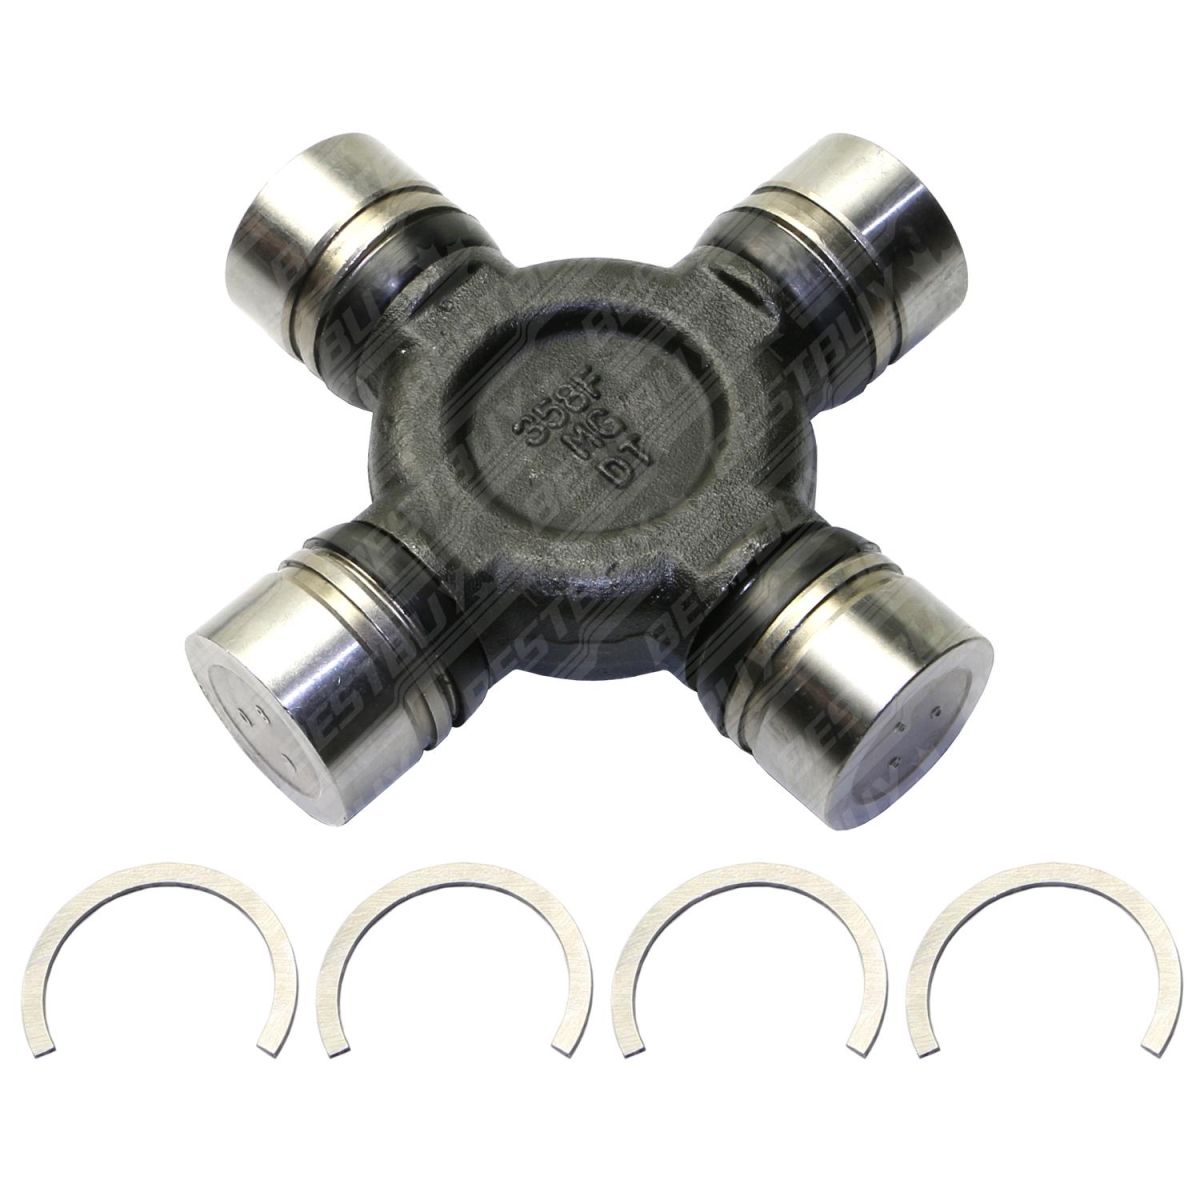 UPC 080066055862 product image for Moog M12-291 Universal Joint OE Replacement | upcitemdb.com